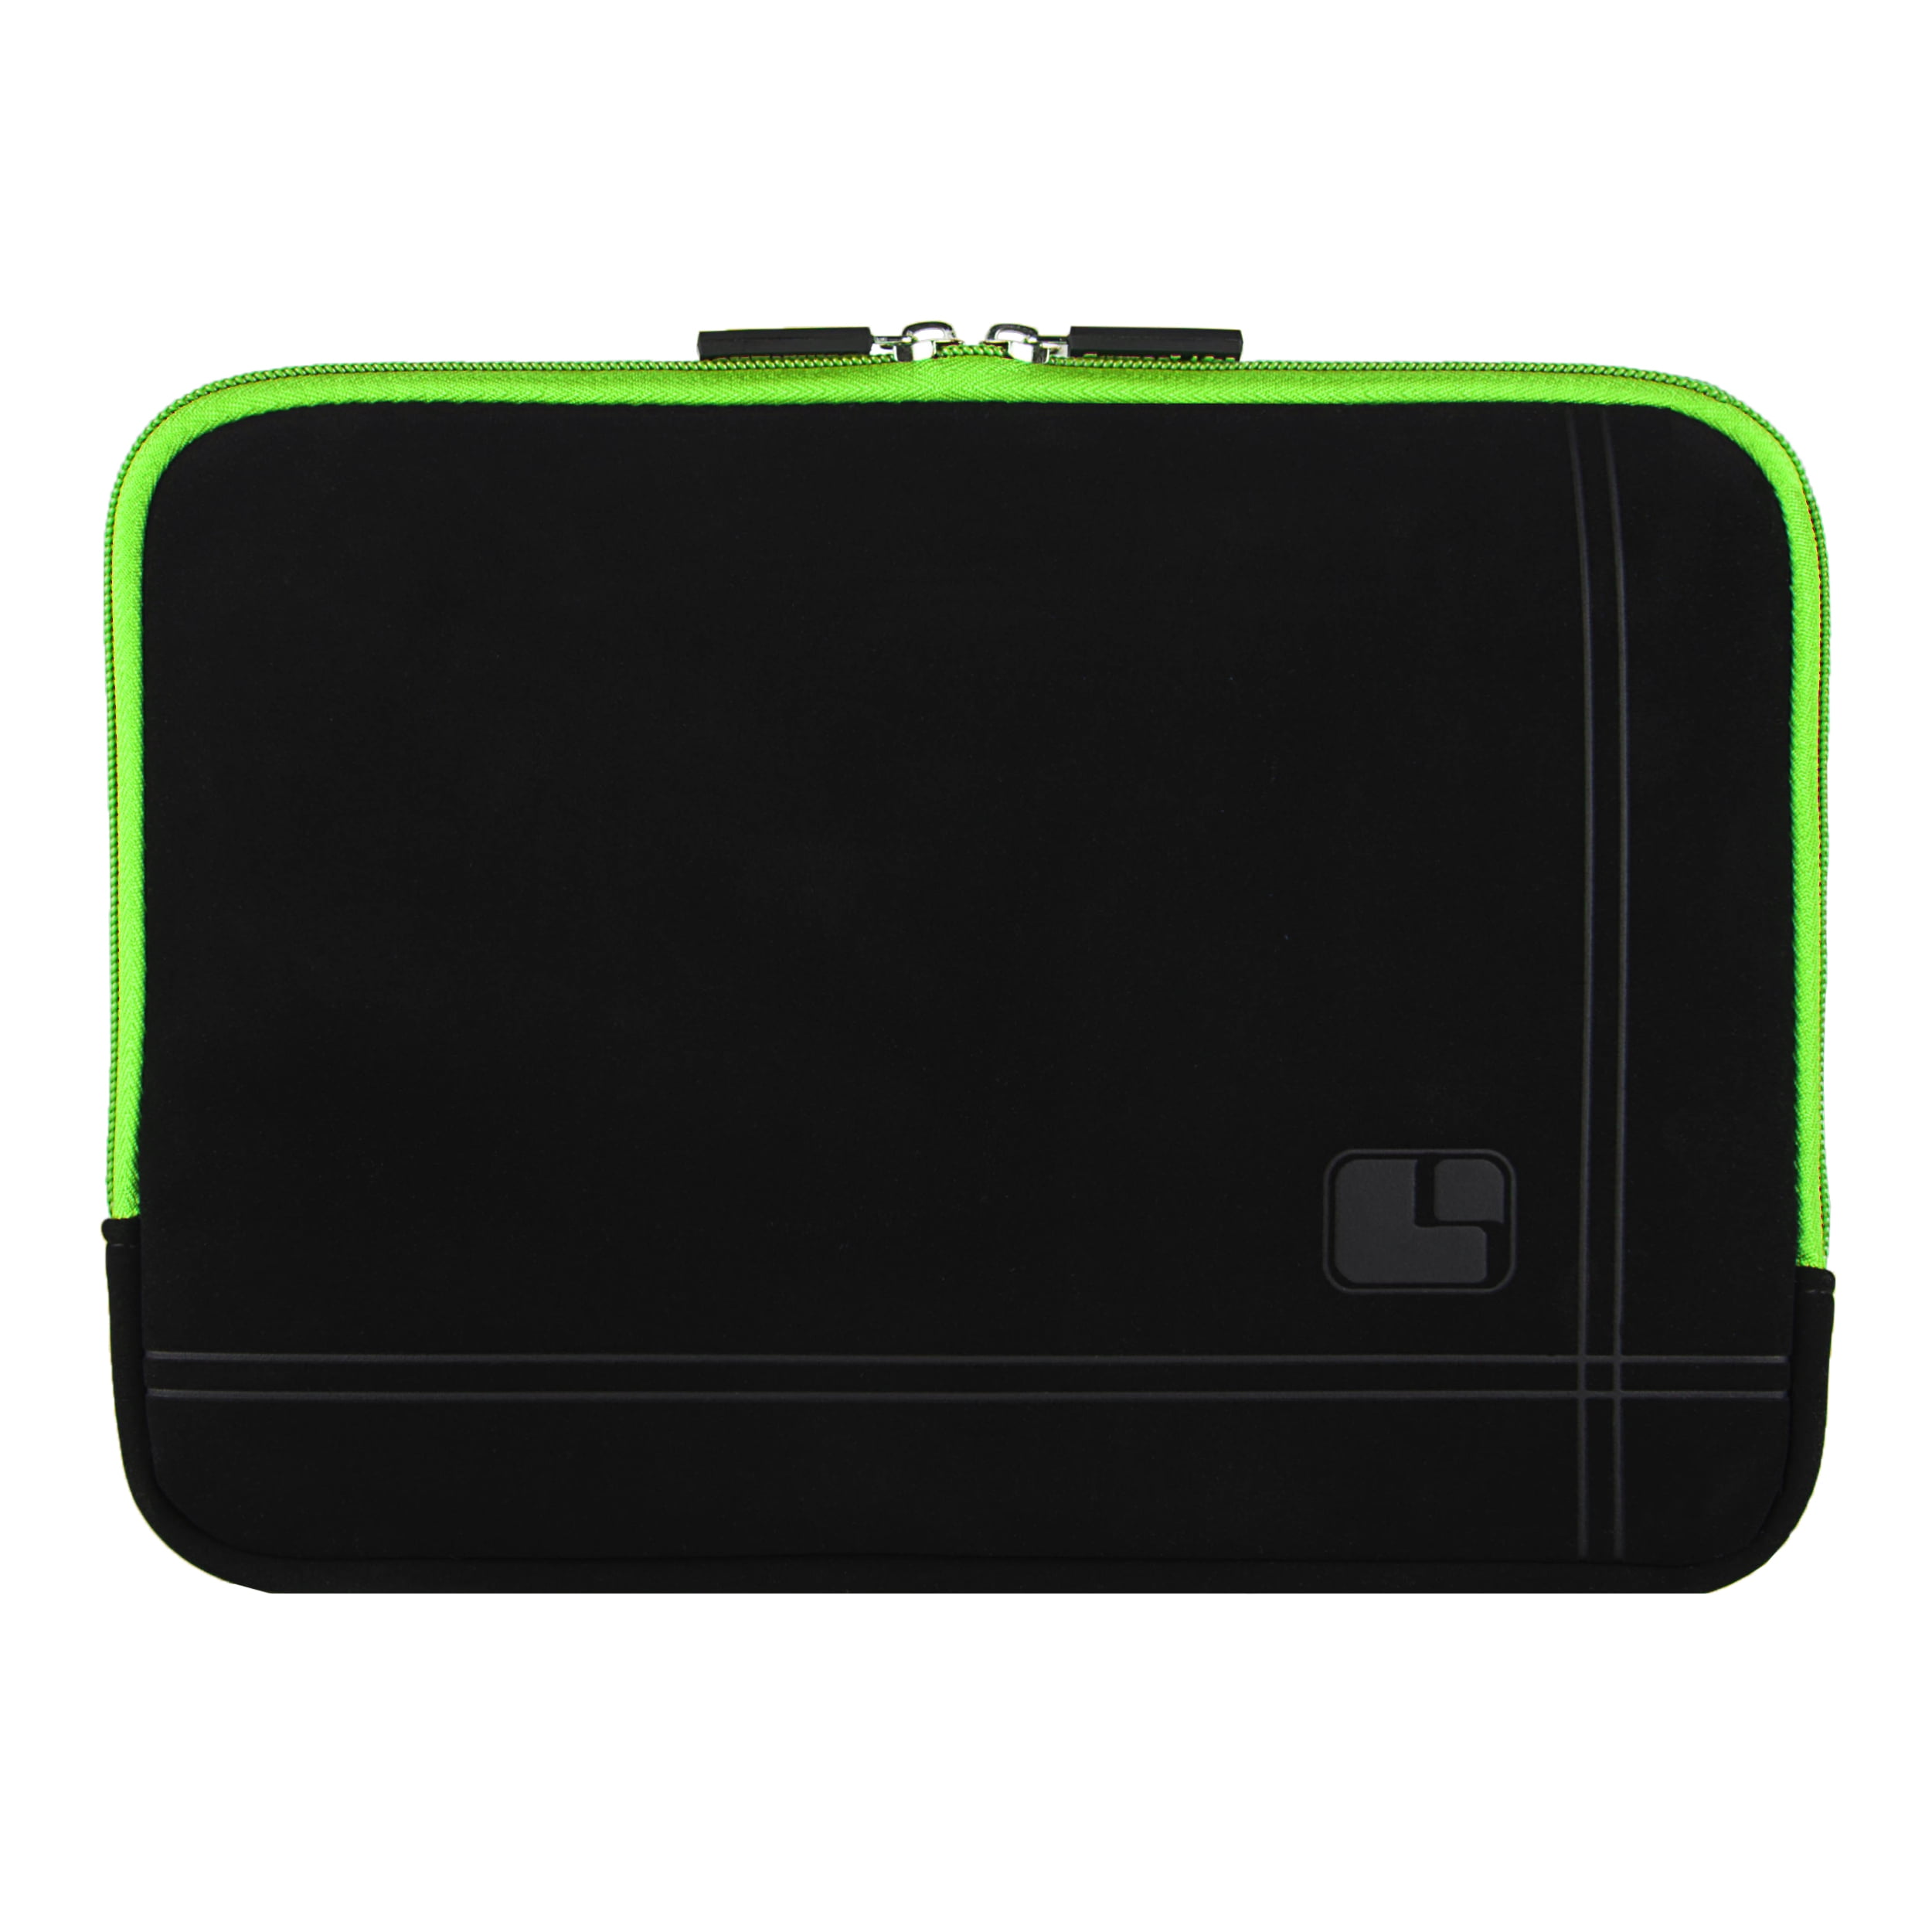 Durable Microsuede Drumm SumacLife Universal Protective Case fits Polaroid  Tablets up to  x  Inches 